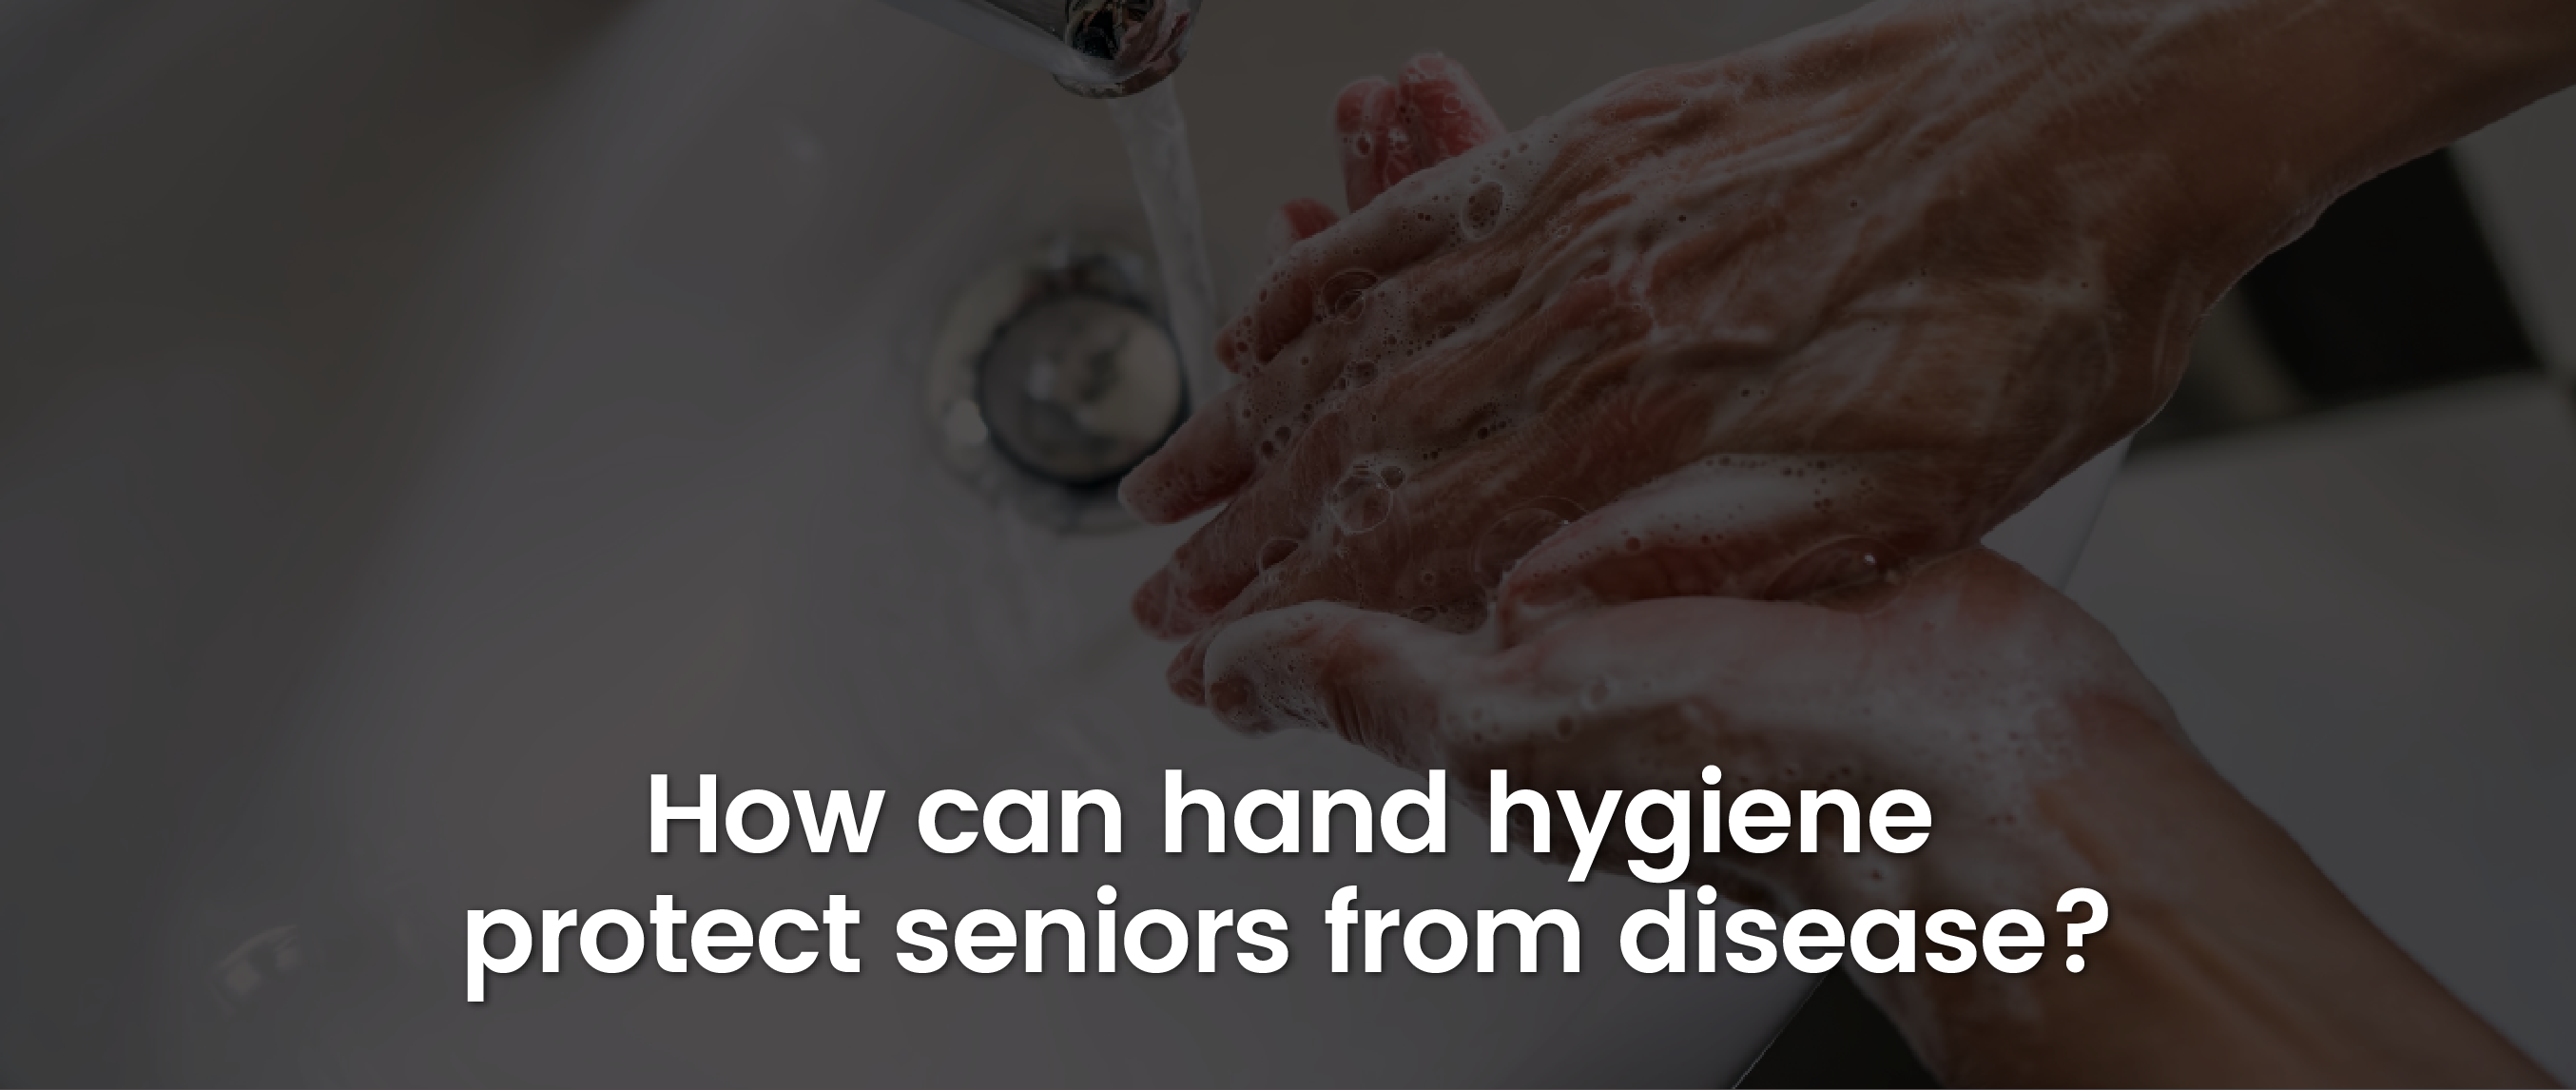 How Can Hand Hygiene Protect Seniors from Disease | Banner Image